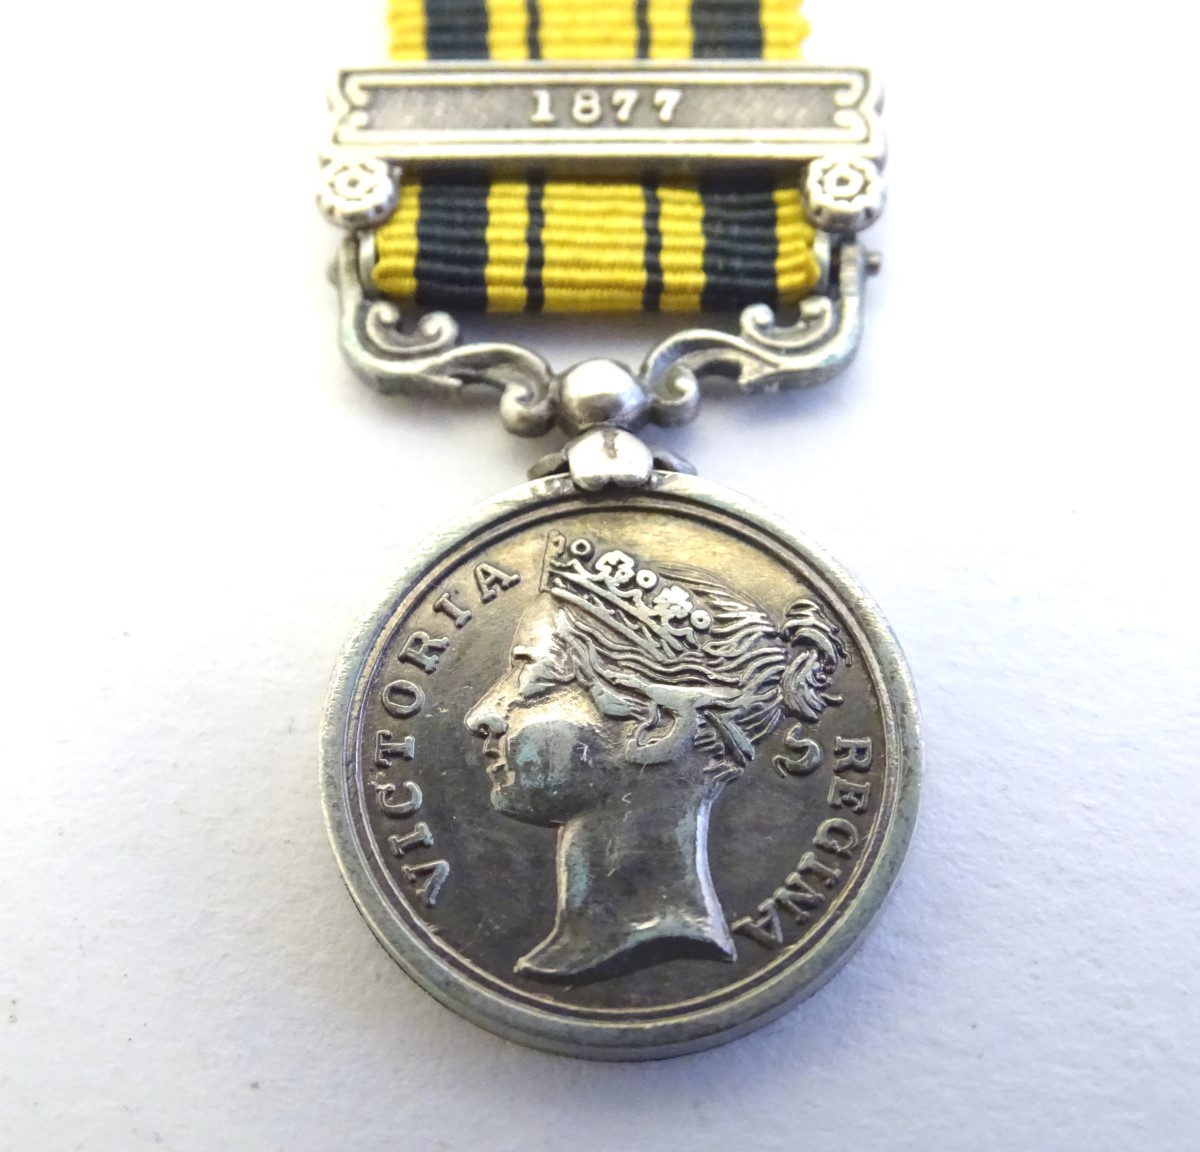 Militaria: a Victorian miniature South Africa Medal, with 1877 bar, 2" long (including ribbon.) - Image 6 of 8